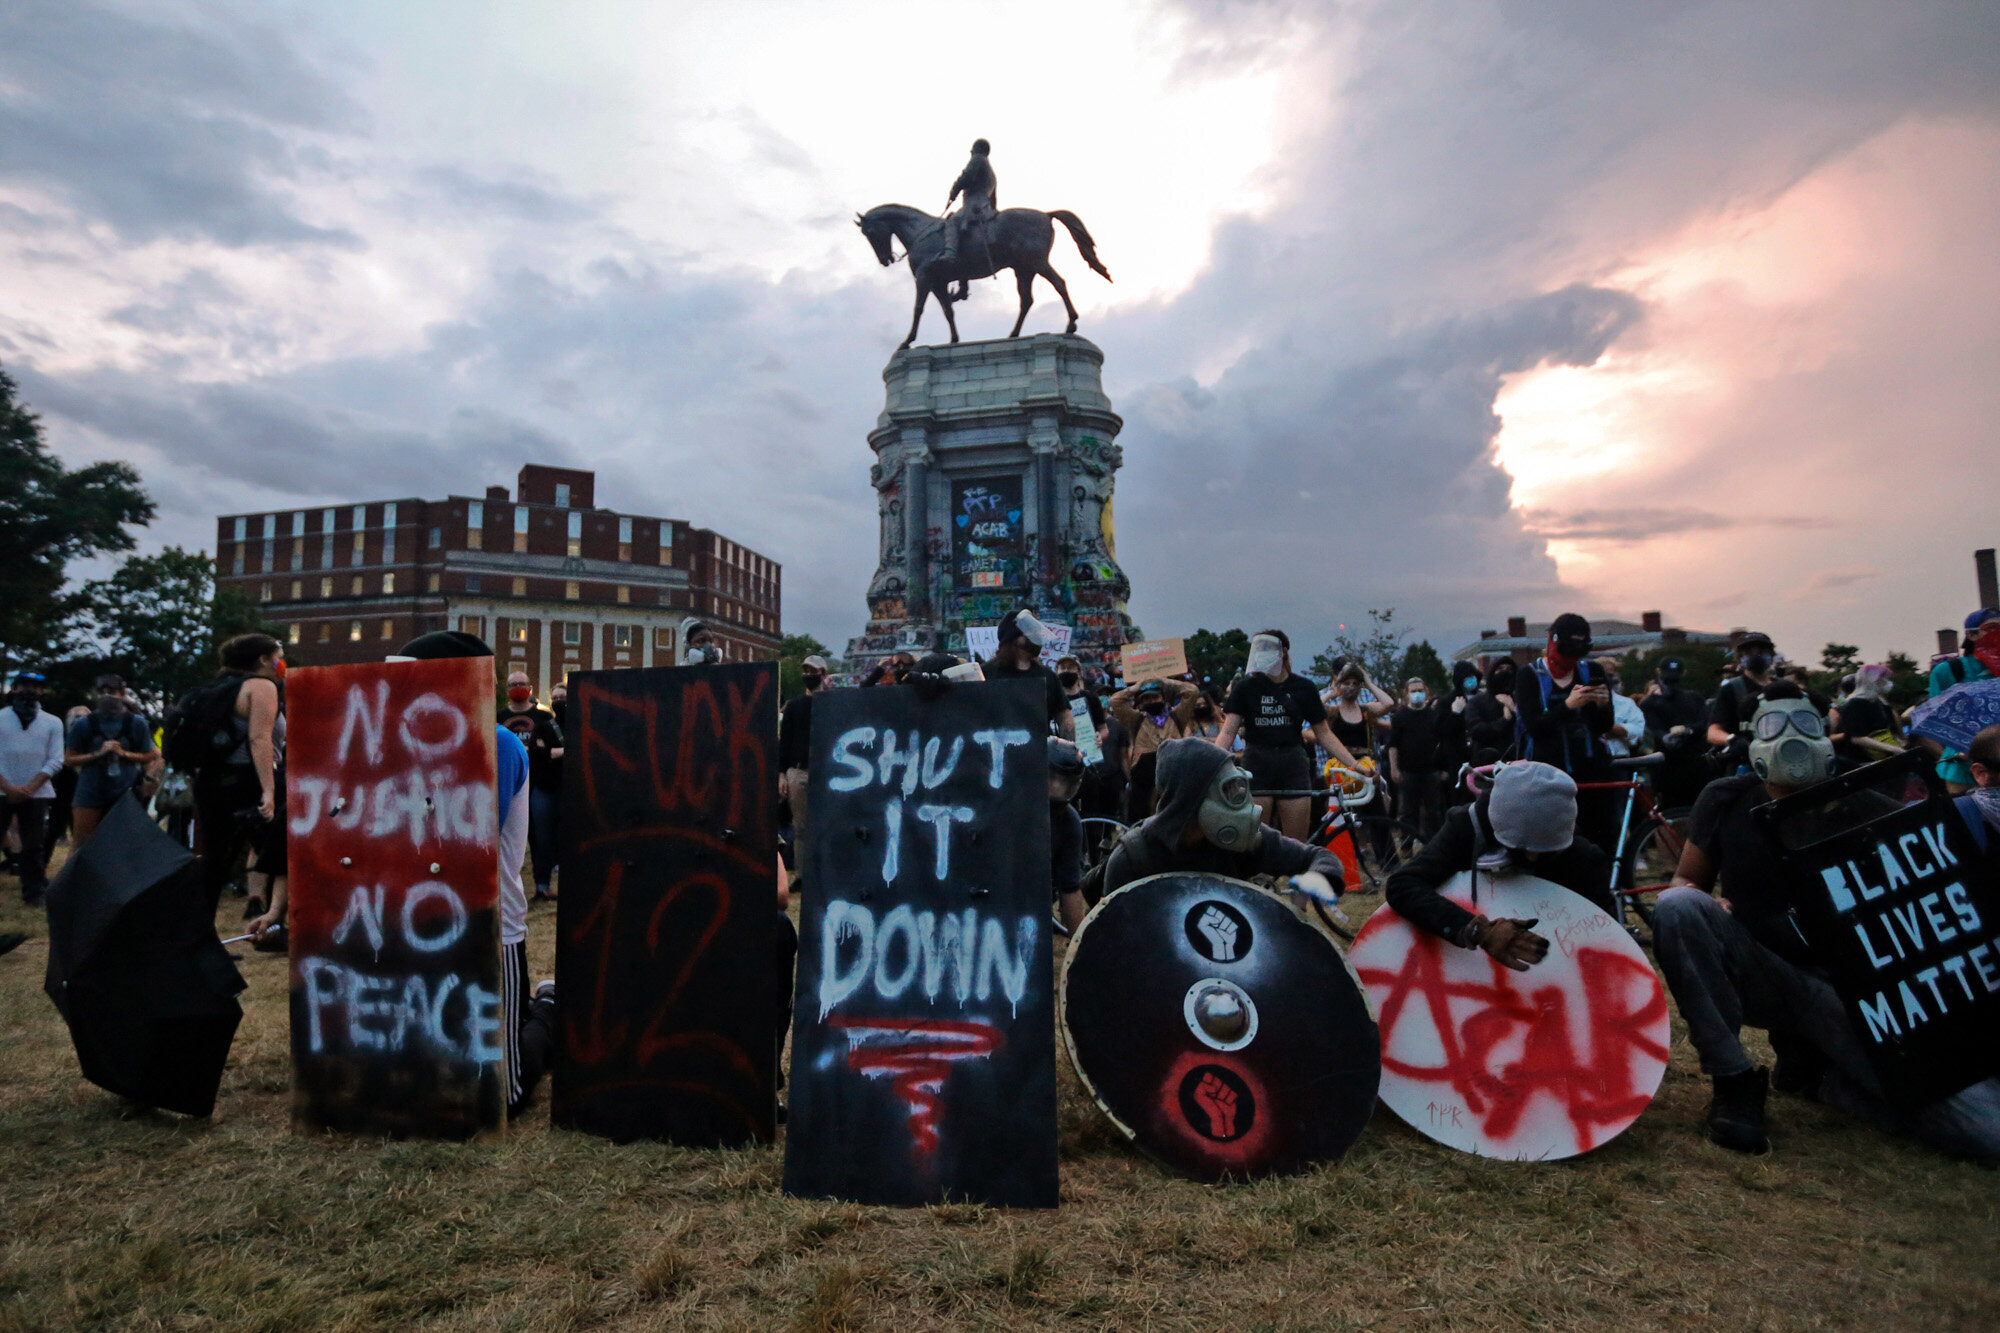  Protesters with shields and gas masks wait for police action as they surround the statue of Confederate Gen. Robert E. Lee on Monument Avenue in Richmond, Va., on June 23, 2020. The state ordered the area around the statue closed from sunset to sunr